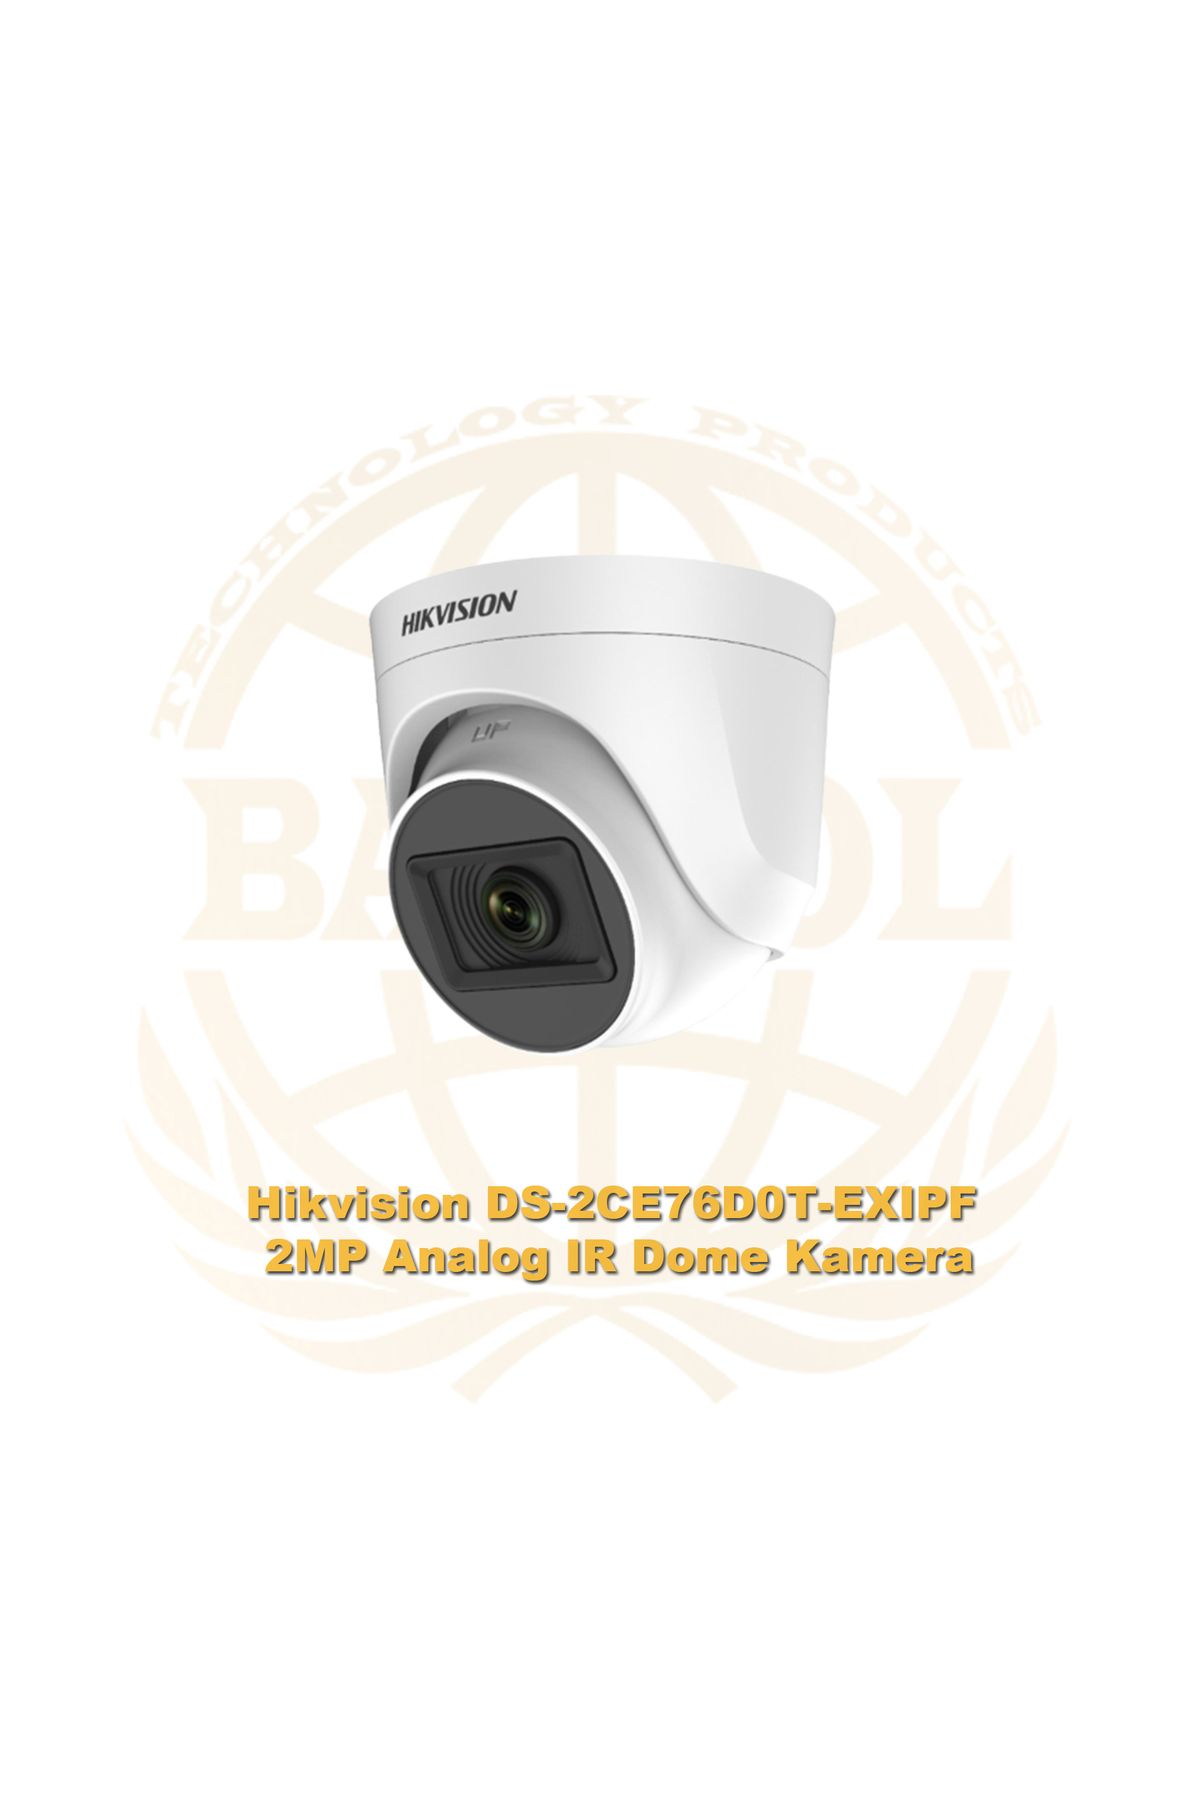 Hikvision DS-2CE76D0T-EXIPF 2MP Analog IR Dome Kamera